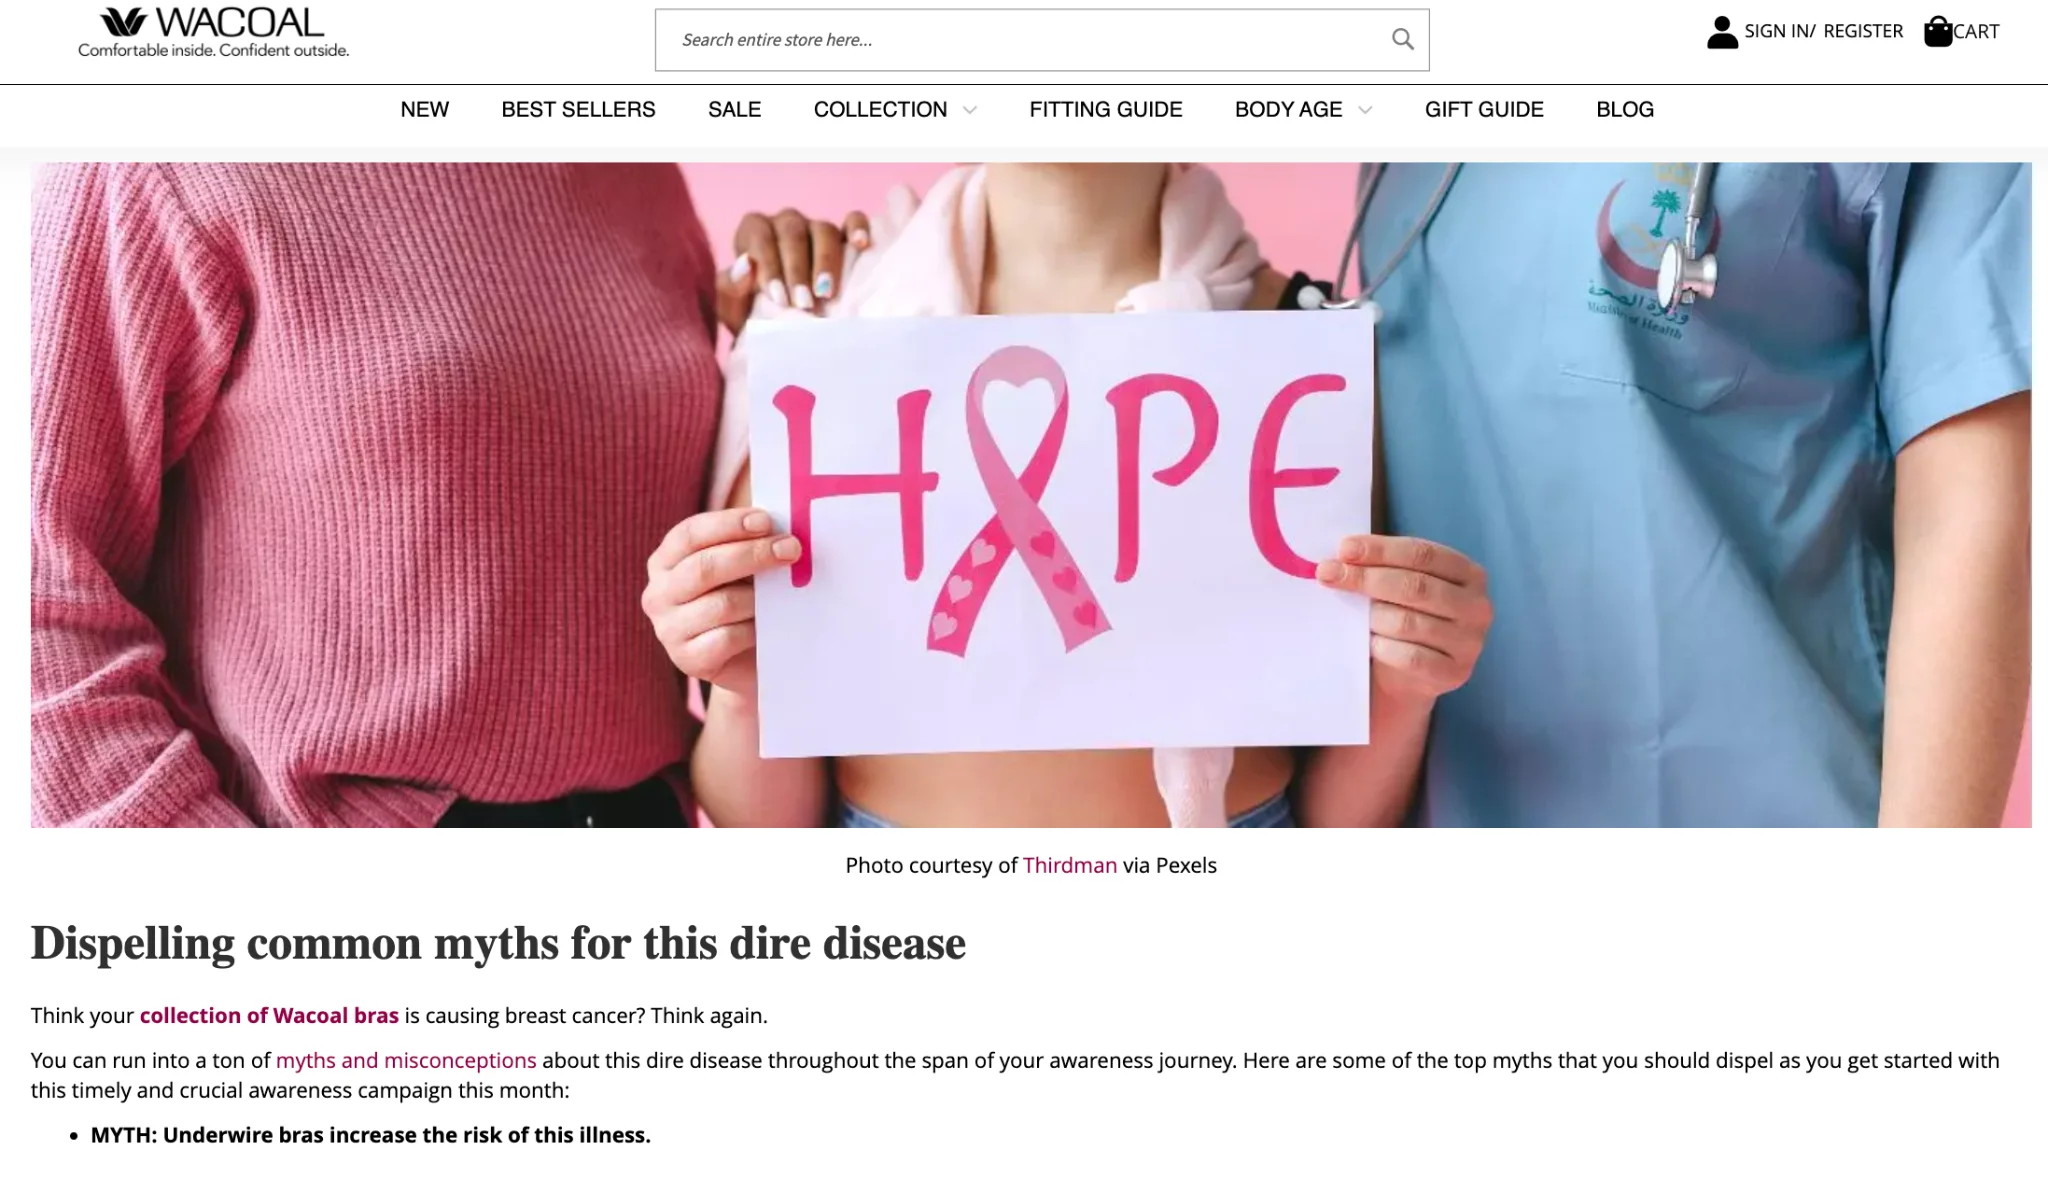 Wacoal PH's breast cancer myths topic was made for breast cancer awareness month